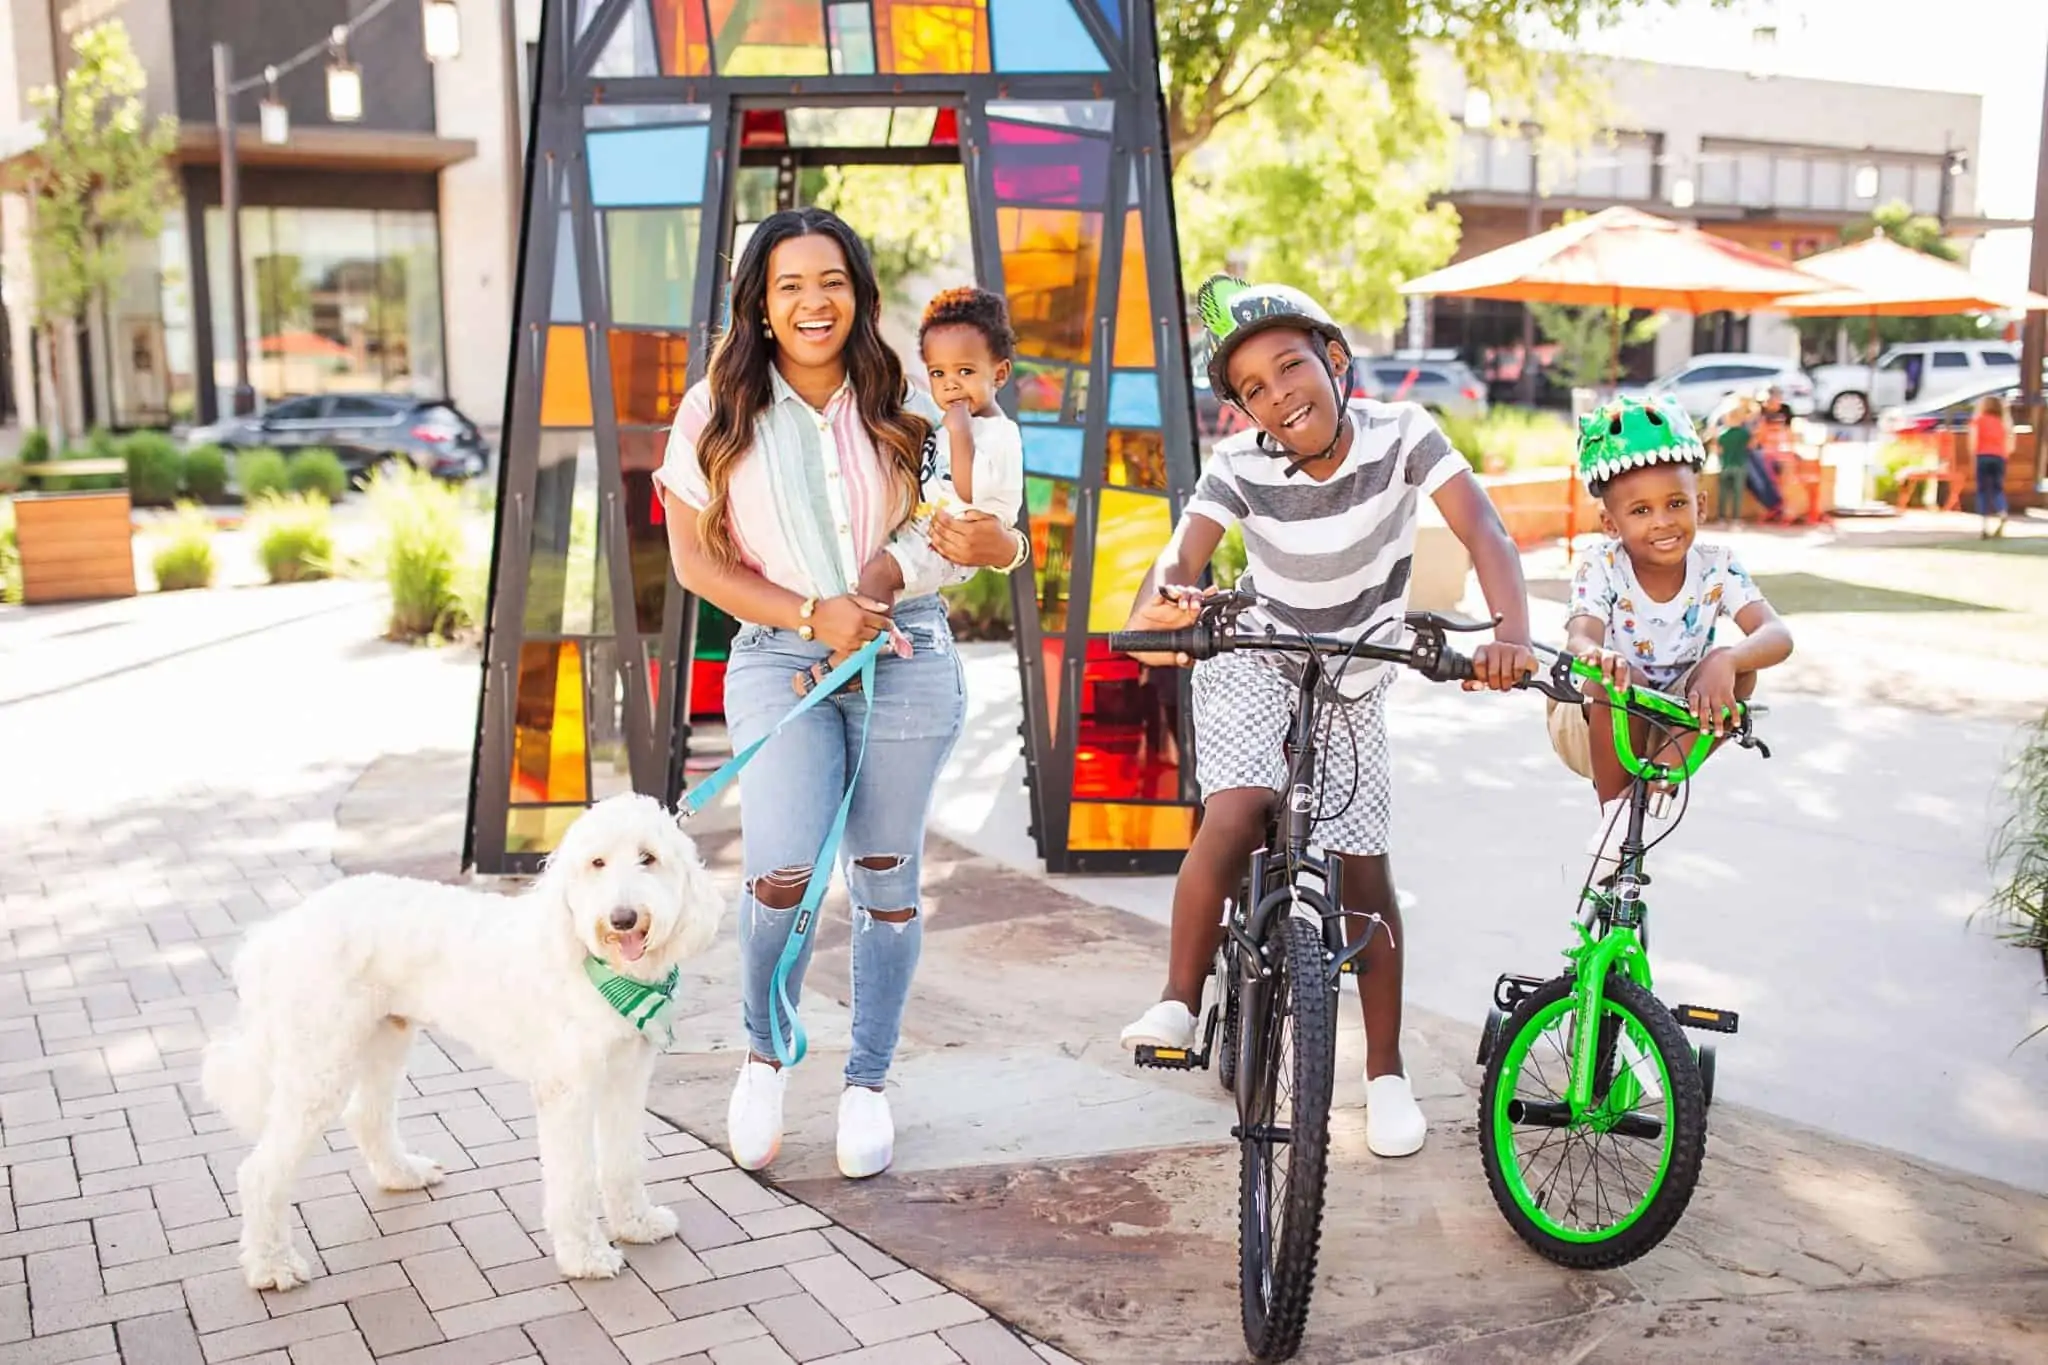 Top 40 Fun Summer Activities for Kids featured by top US life and style blog, Glamorous Versatility: image of a family going on a bike ride